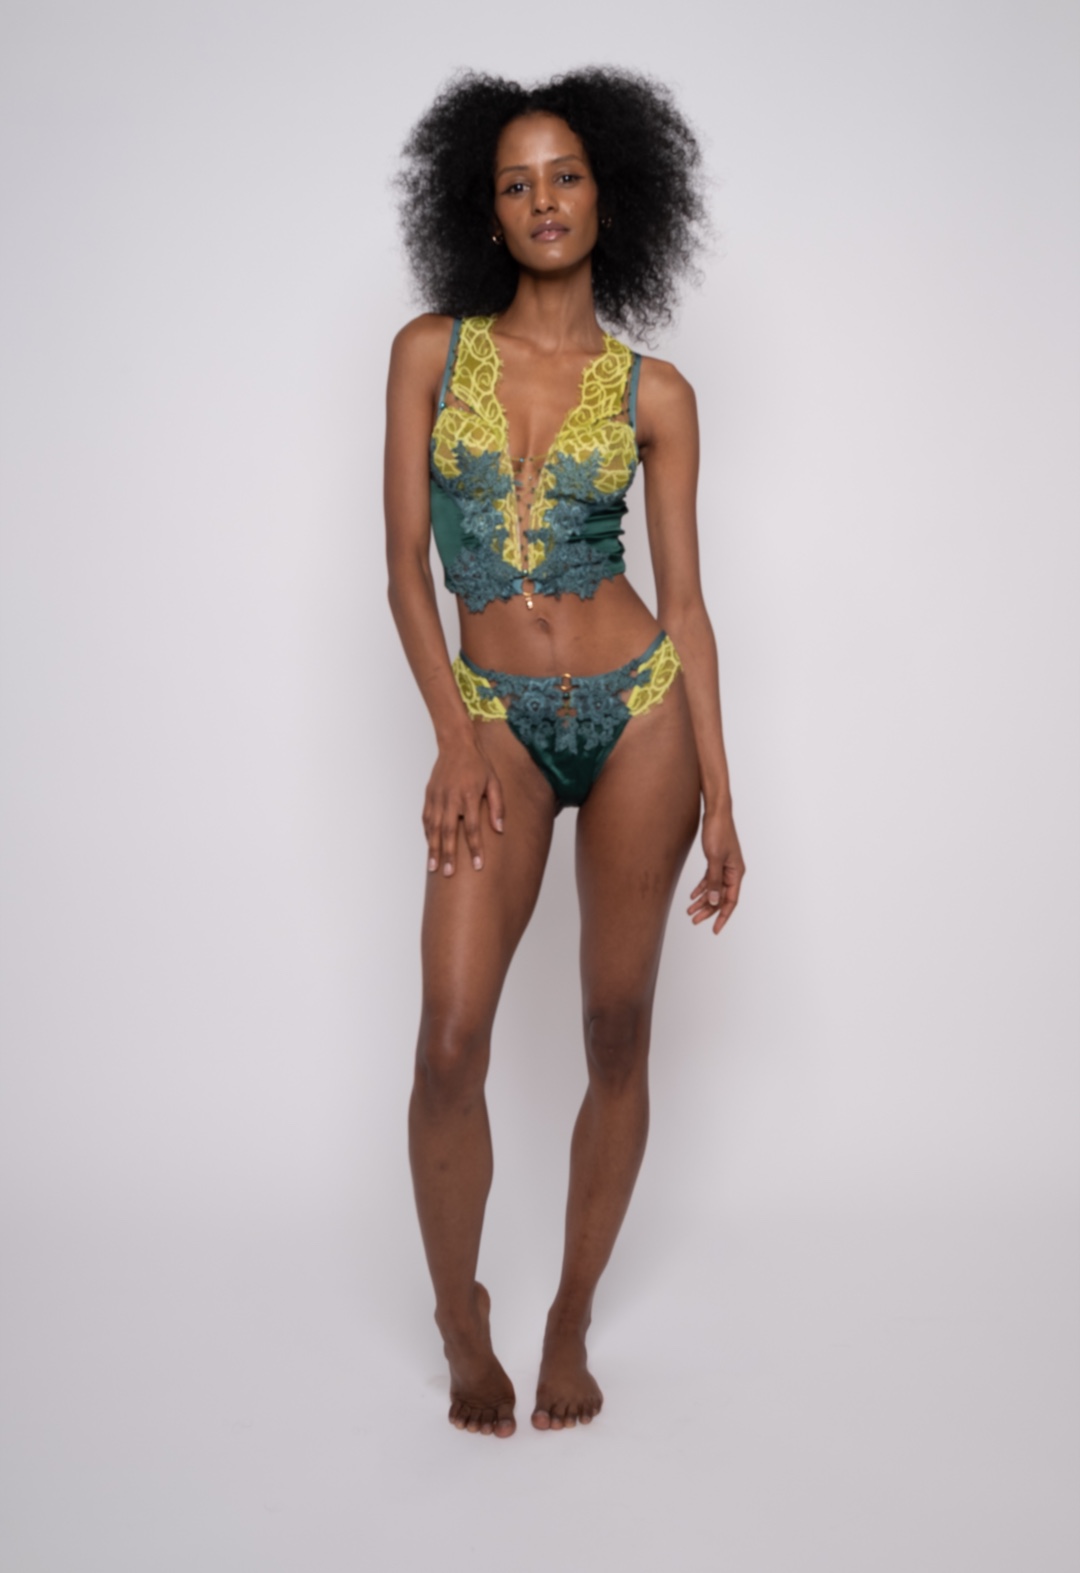 A slender black model facing the camera with one hip cocked, wearing an emerald and chartreuse bra and panty.